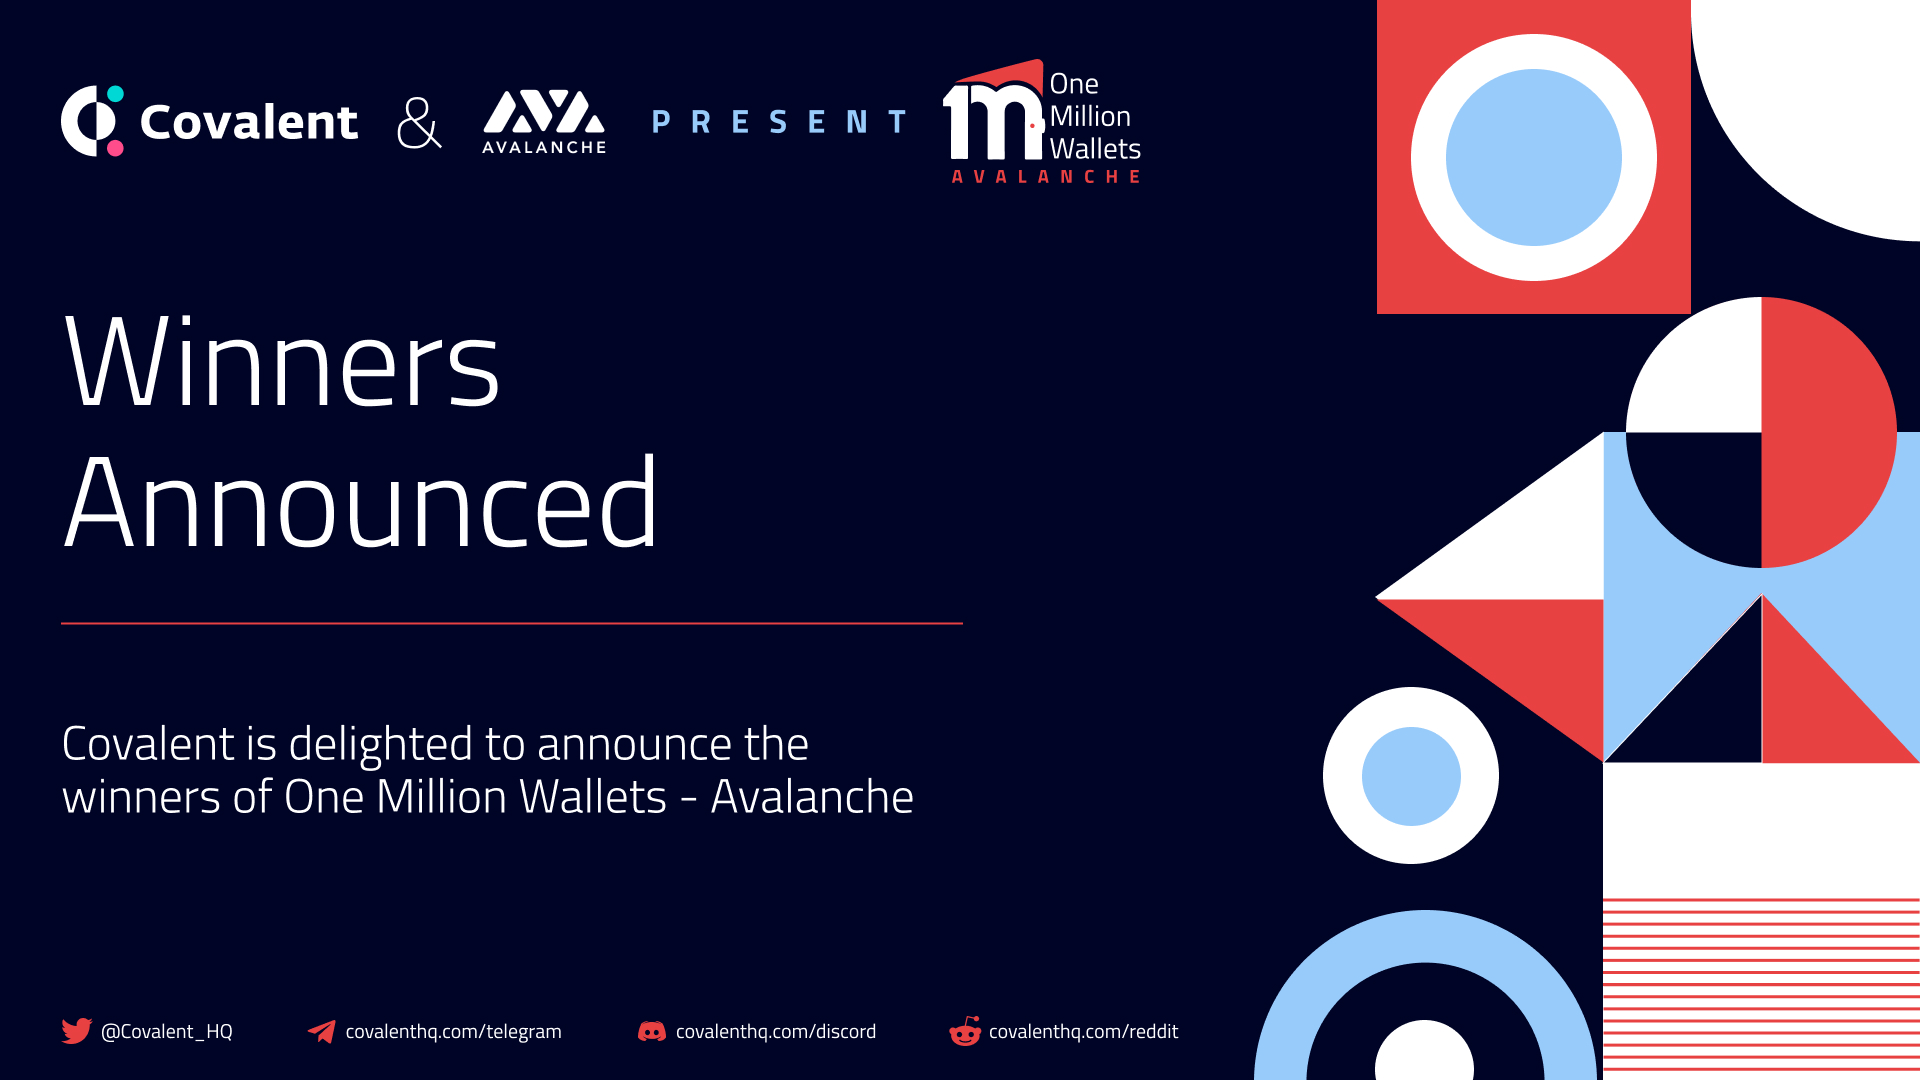 '#OneMillionWallets - Avalanche' Winners Announced